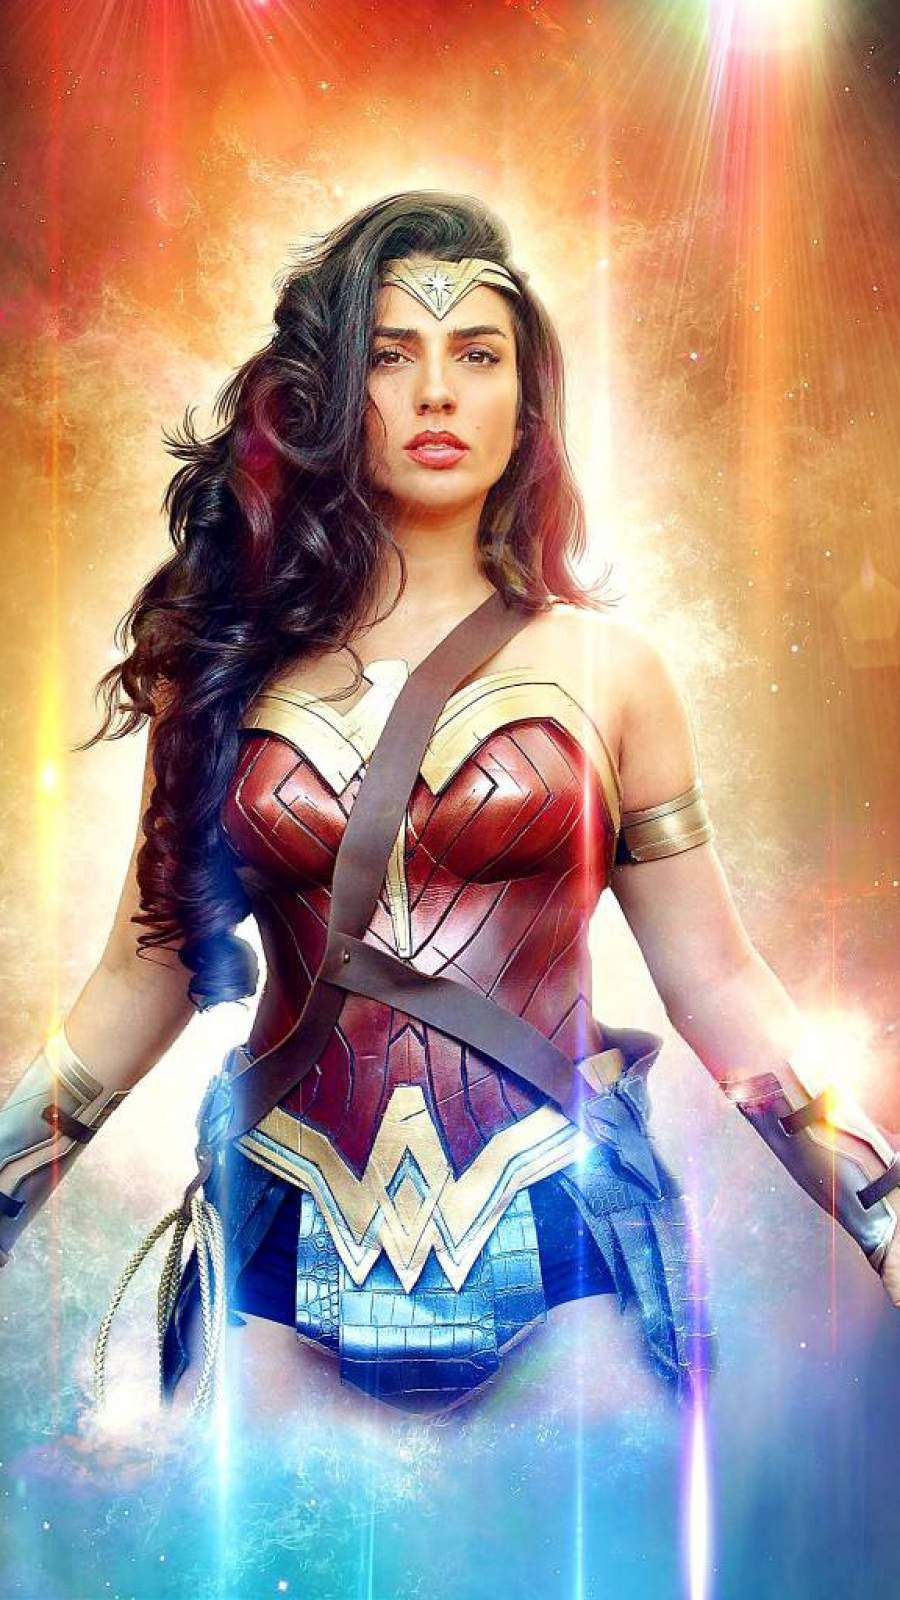 iPhone Wallpaper for iPhone iPhone 8 Plus, iPhone 6s, iPhone 6s Plus, iPhone X and iPod Touch High Quality Wal. Wonder woman cosplay, Wonder woman, Comic girl